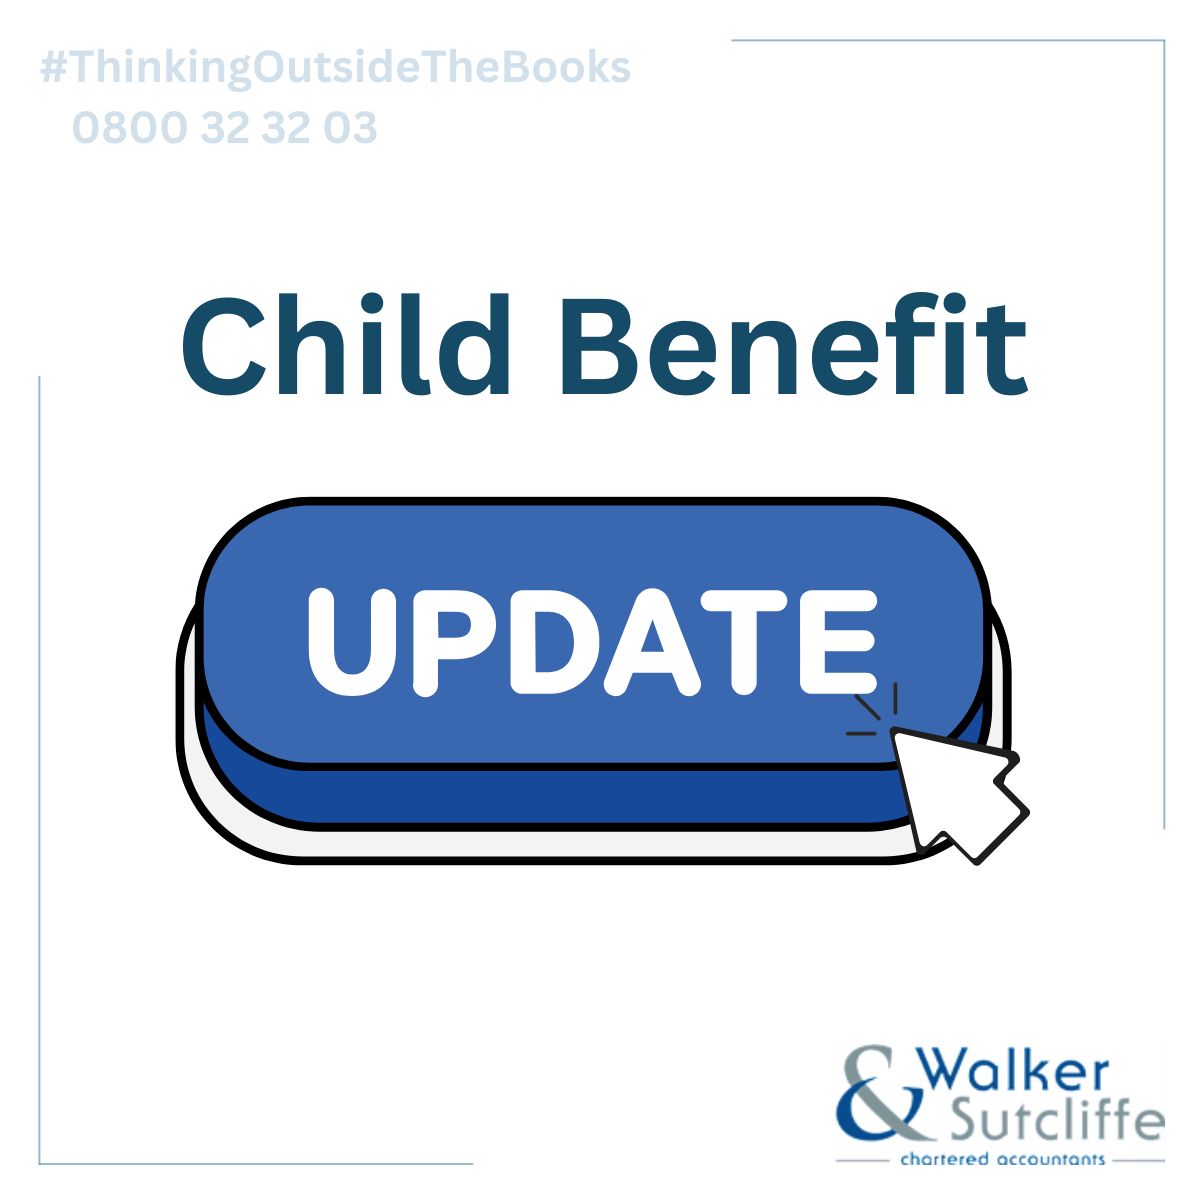 Child Benefit Update Alert!

Did you know that the child benefit threshold rose this month?

You can check finer details, your eligibility or register a new claim here: ow.ly/IFCK50RqtgM

For help, drop us a message.

#WalkerandSutcliffe  #ChildBenefit #TaxChanges